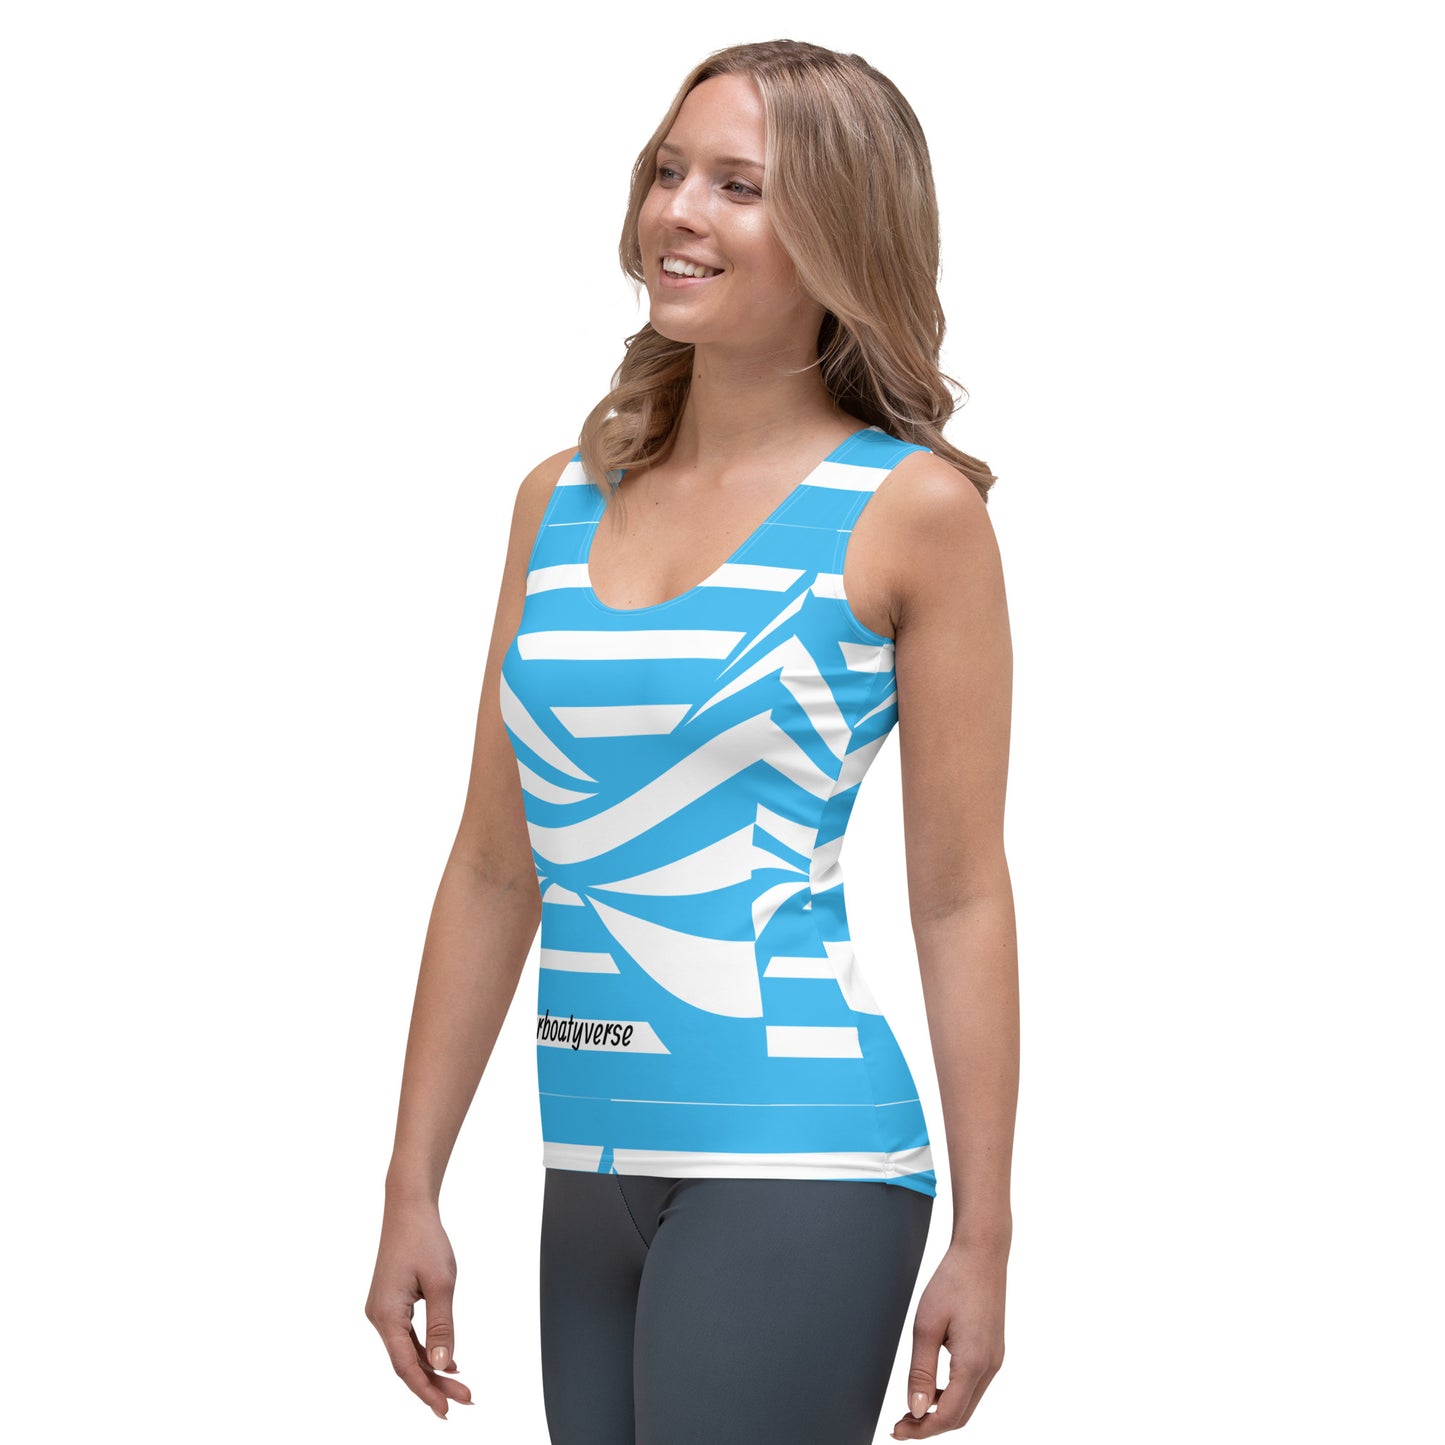 Women's Blue Sublimation Cut & Sew Tank Top By Our BoatyVerse